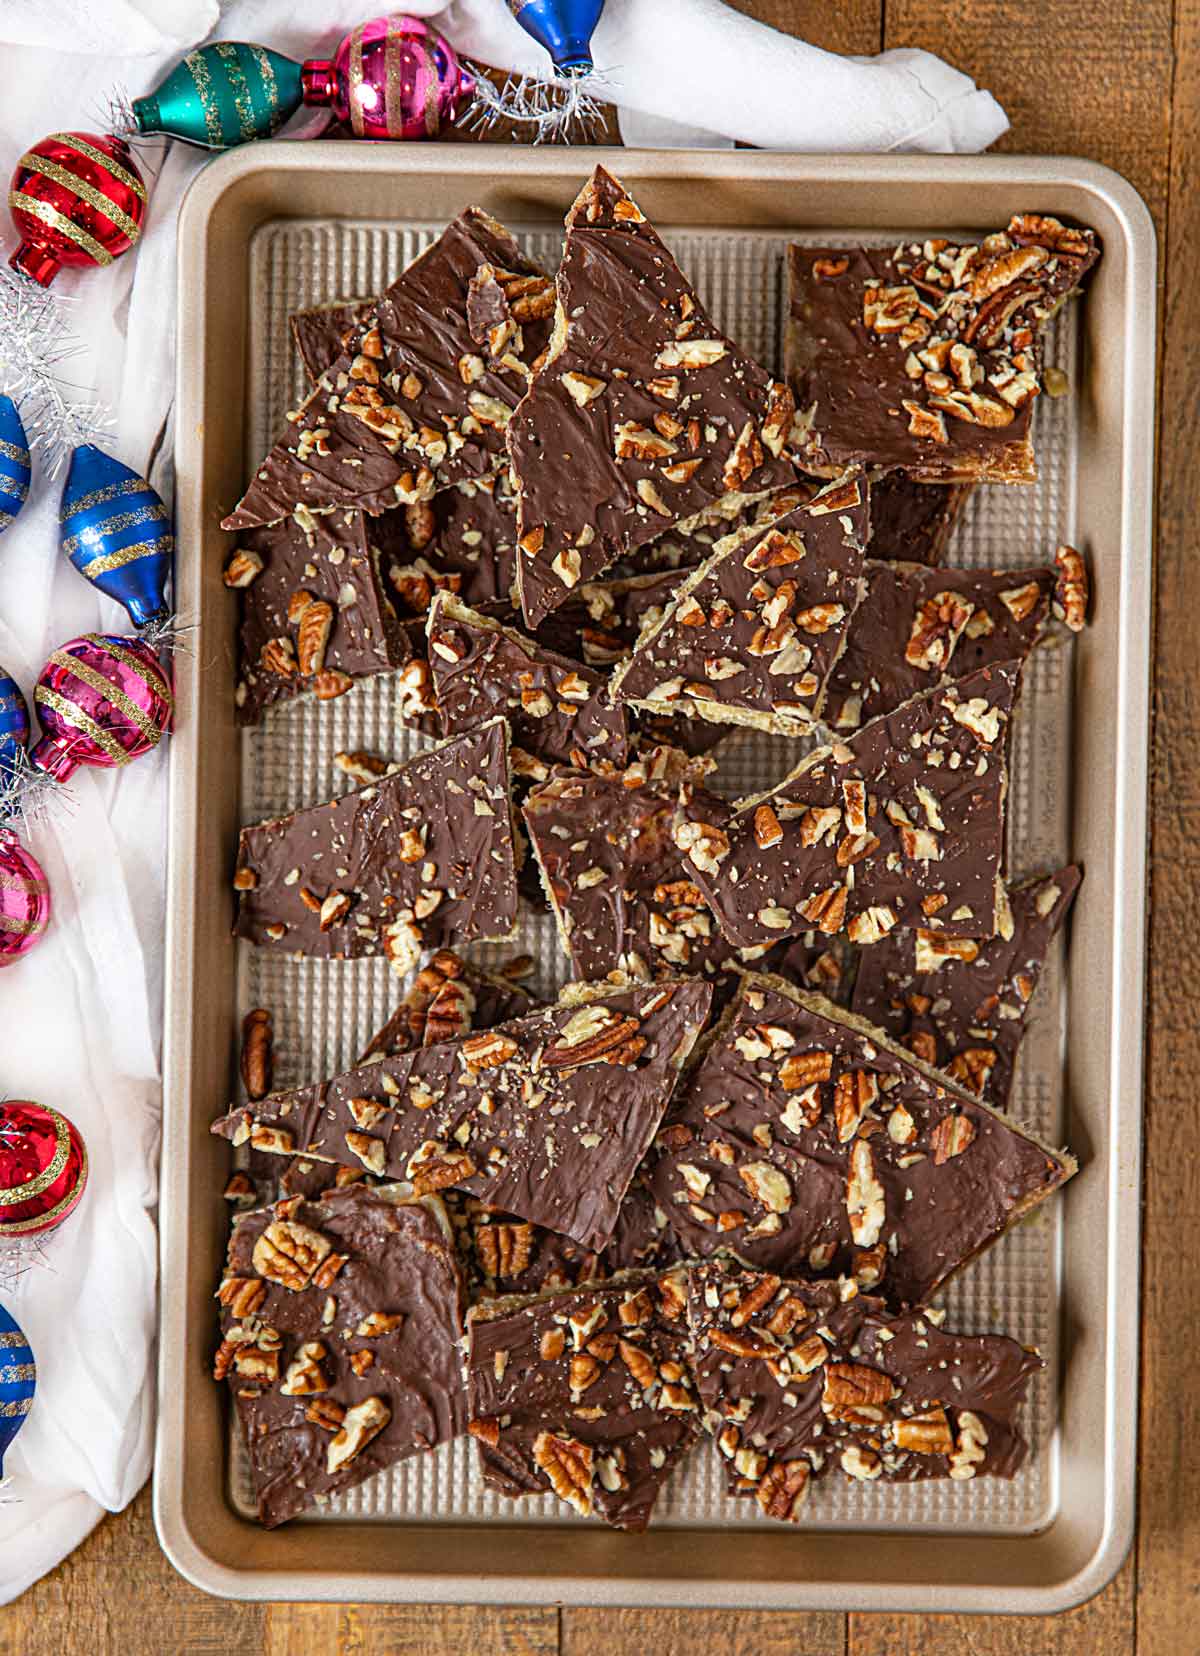 Tray of Saltine Cracker Toffee Candy